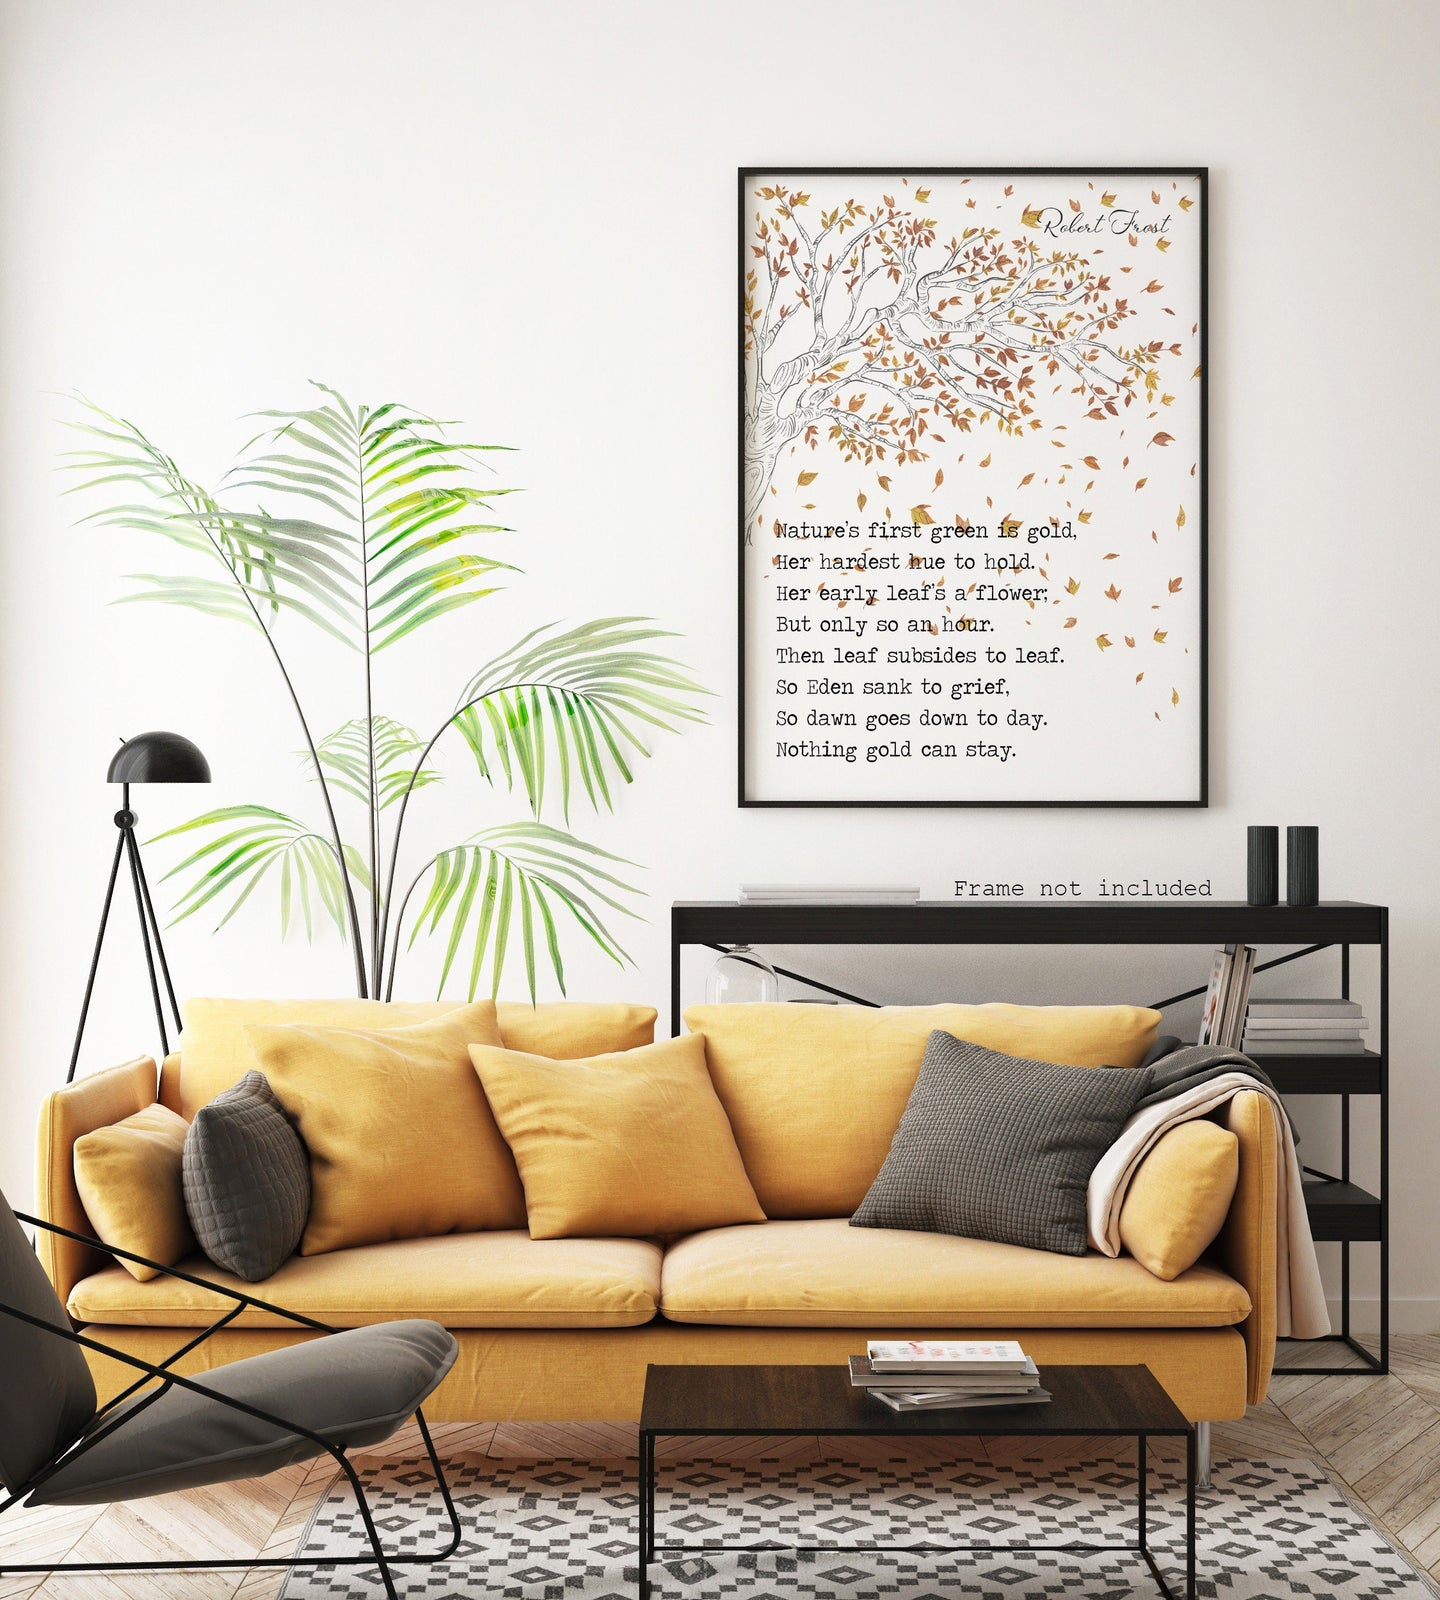 Robert Frost Poem Print - Nothing gold can stay - bedroom decor print Robert frost quote Nature's first green is gold poetry poster